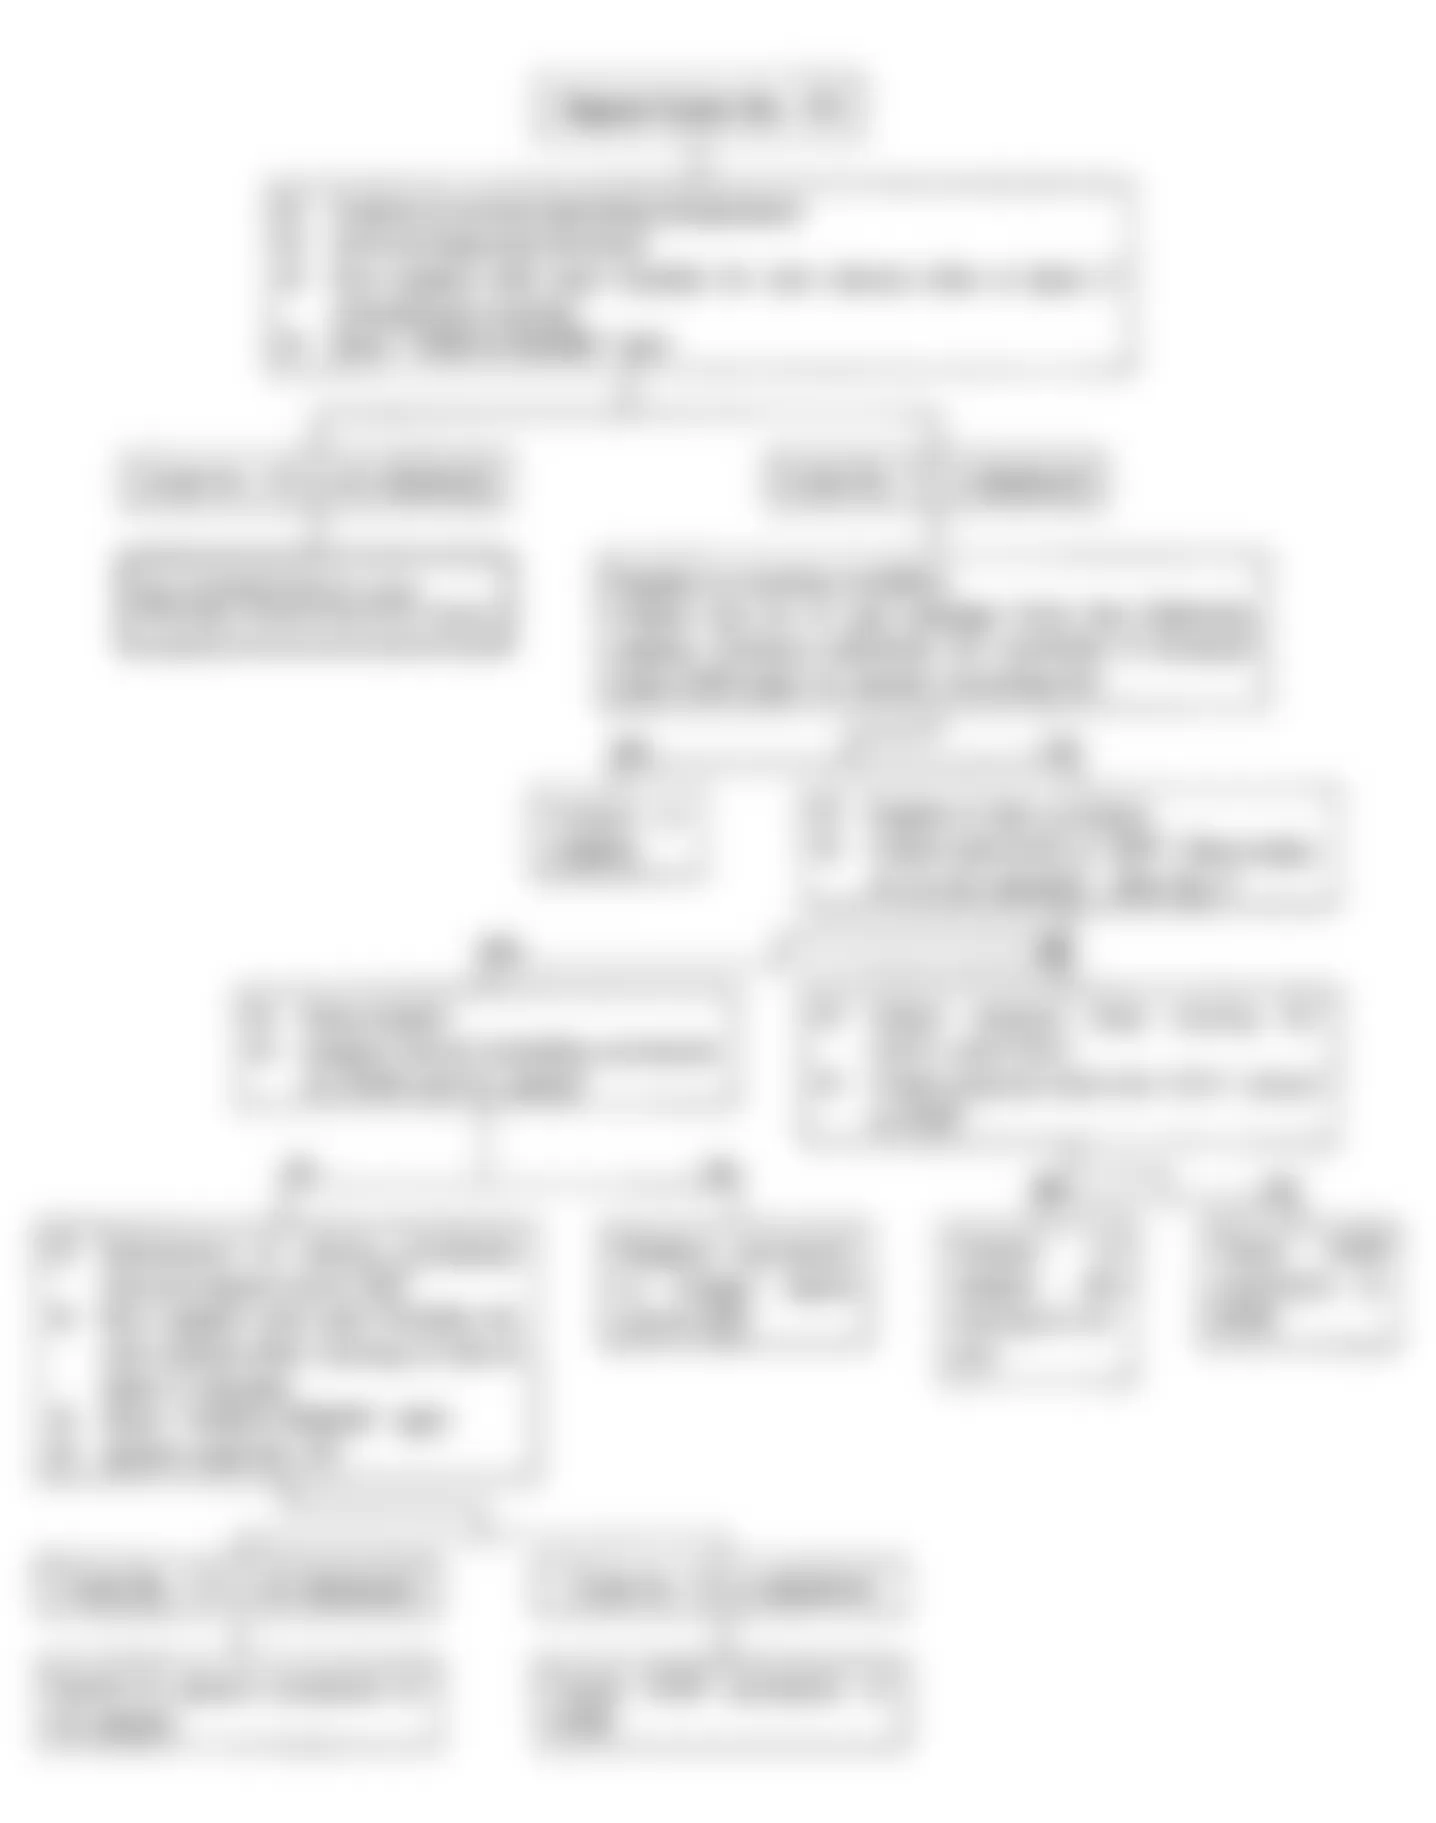 Isuzu Rodeo LS 1991 - Component Locations -  Code No. 13 Flow Chart, System Normal